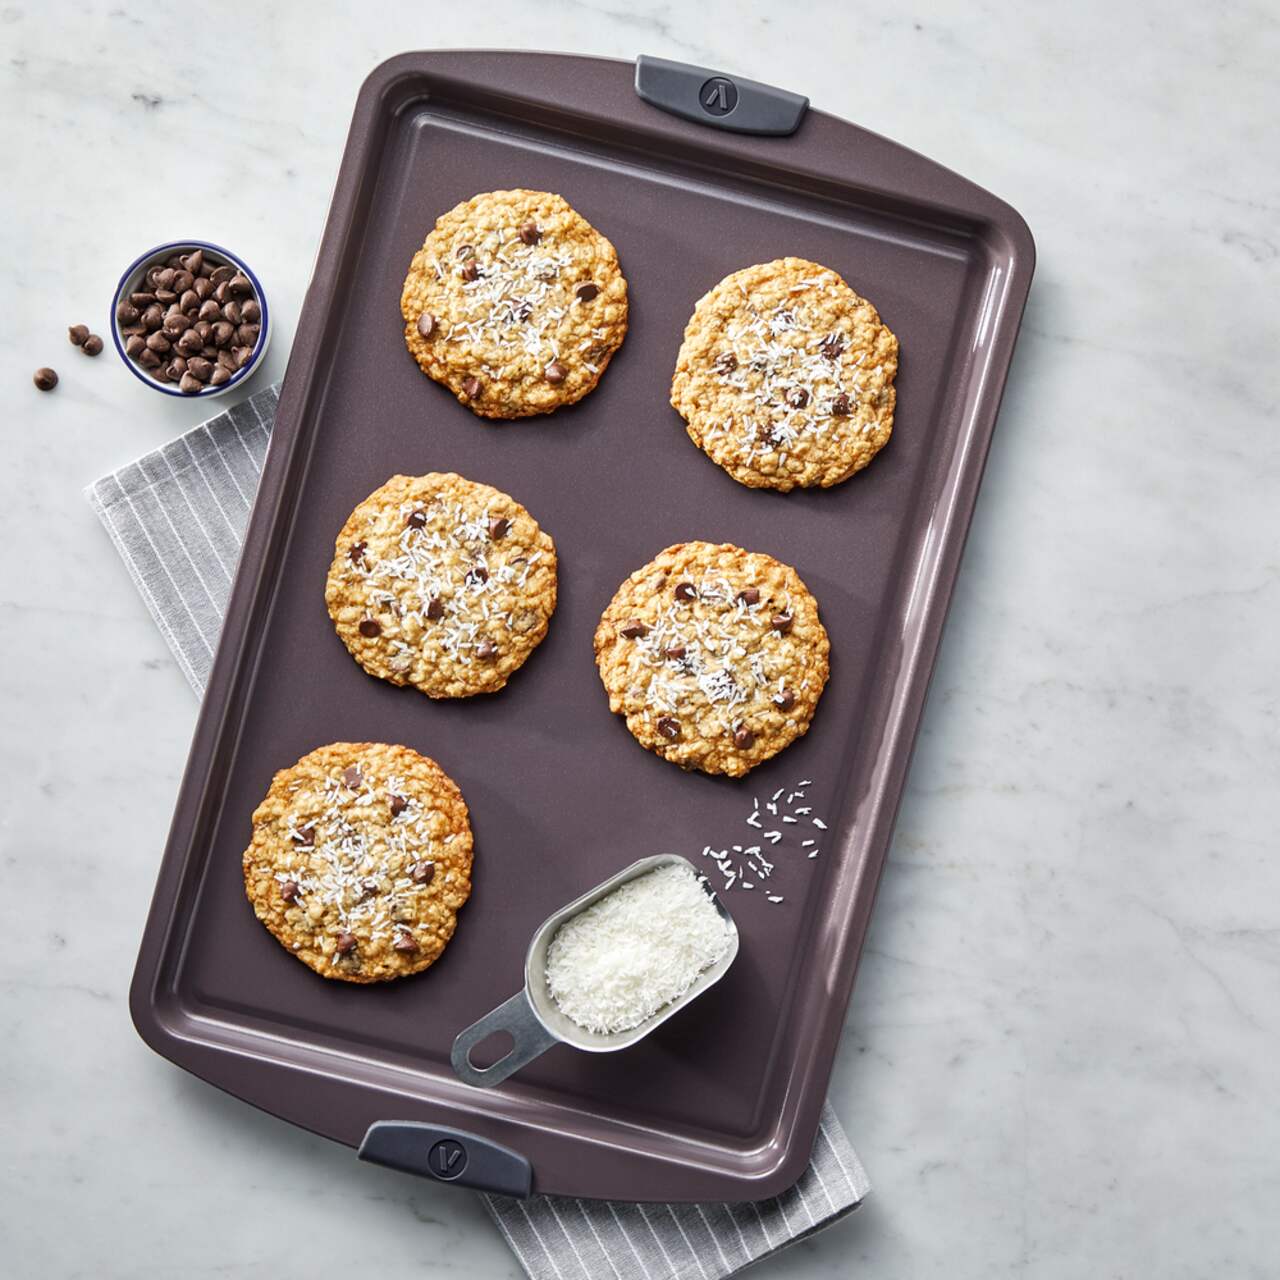 https://media-www.canadiantire.ca/product/living/kitchen/bakeware-baking-prep/1429594/vida-large-cookie-sheet-17-25-x-11-25--d4a32eea-f39a-46ce-bb18-c88d49544b85.png?imdensity=1&imwidth=1244&impolicy=mZoom